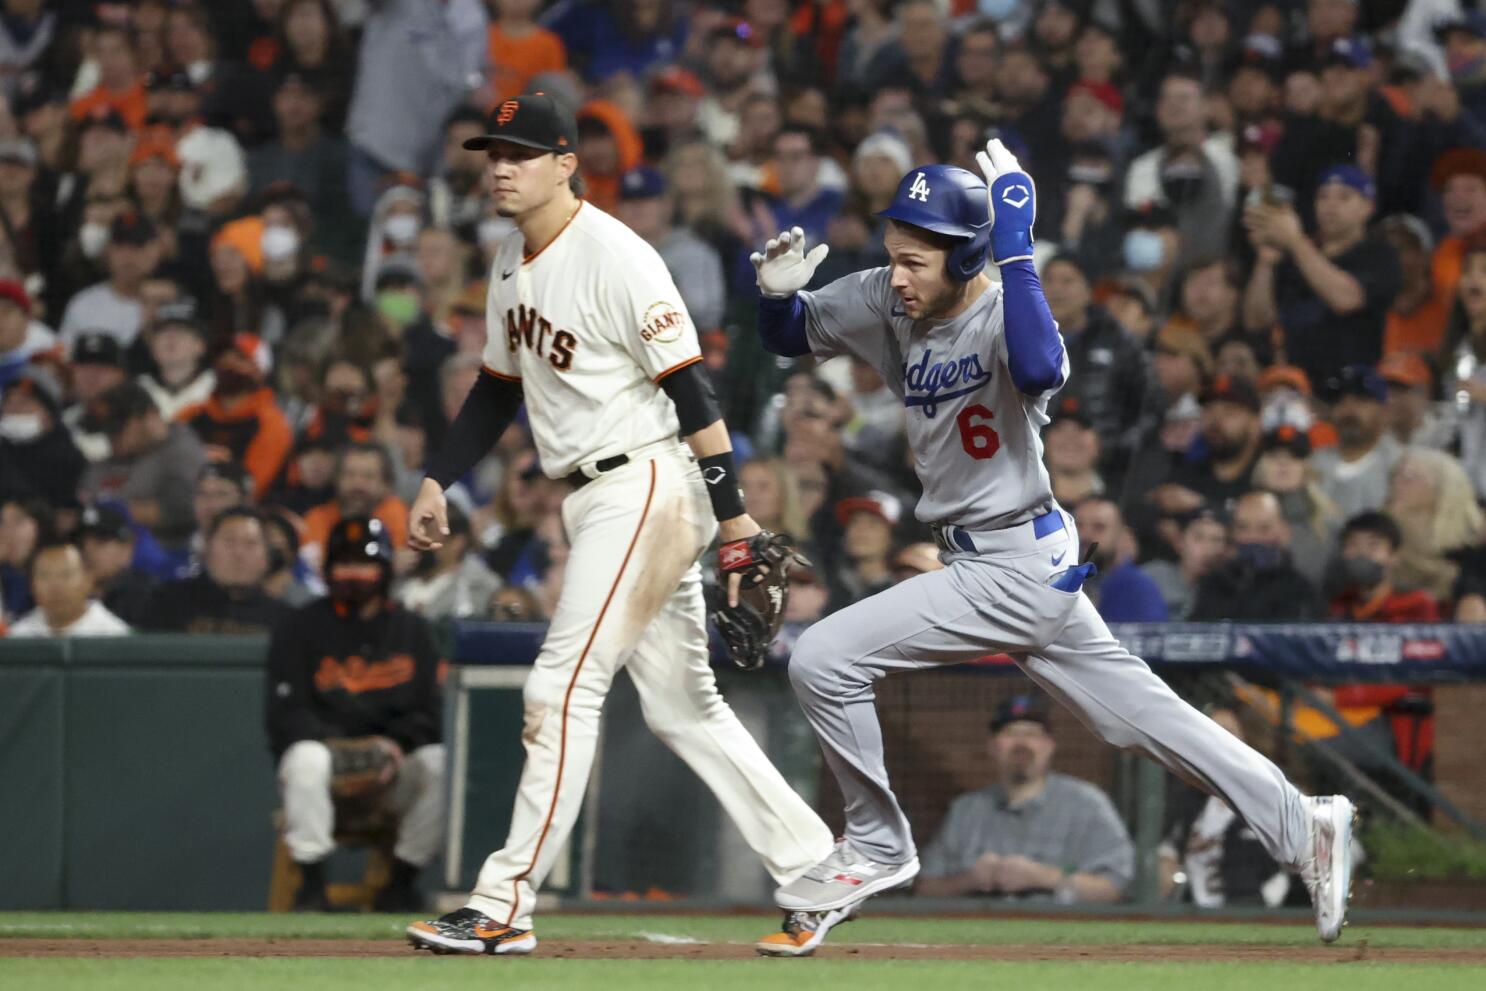 Buster Posey's reaction to Cody Bellinger's errant throw over his head  giving the Giants the lead : r/baseball